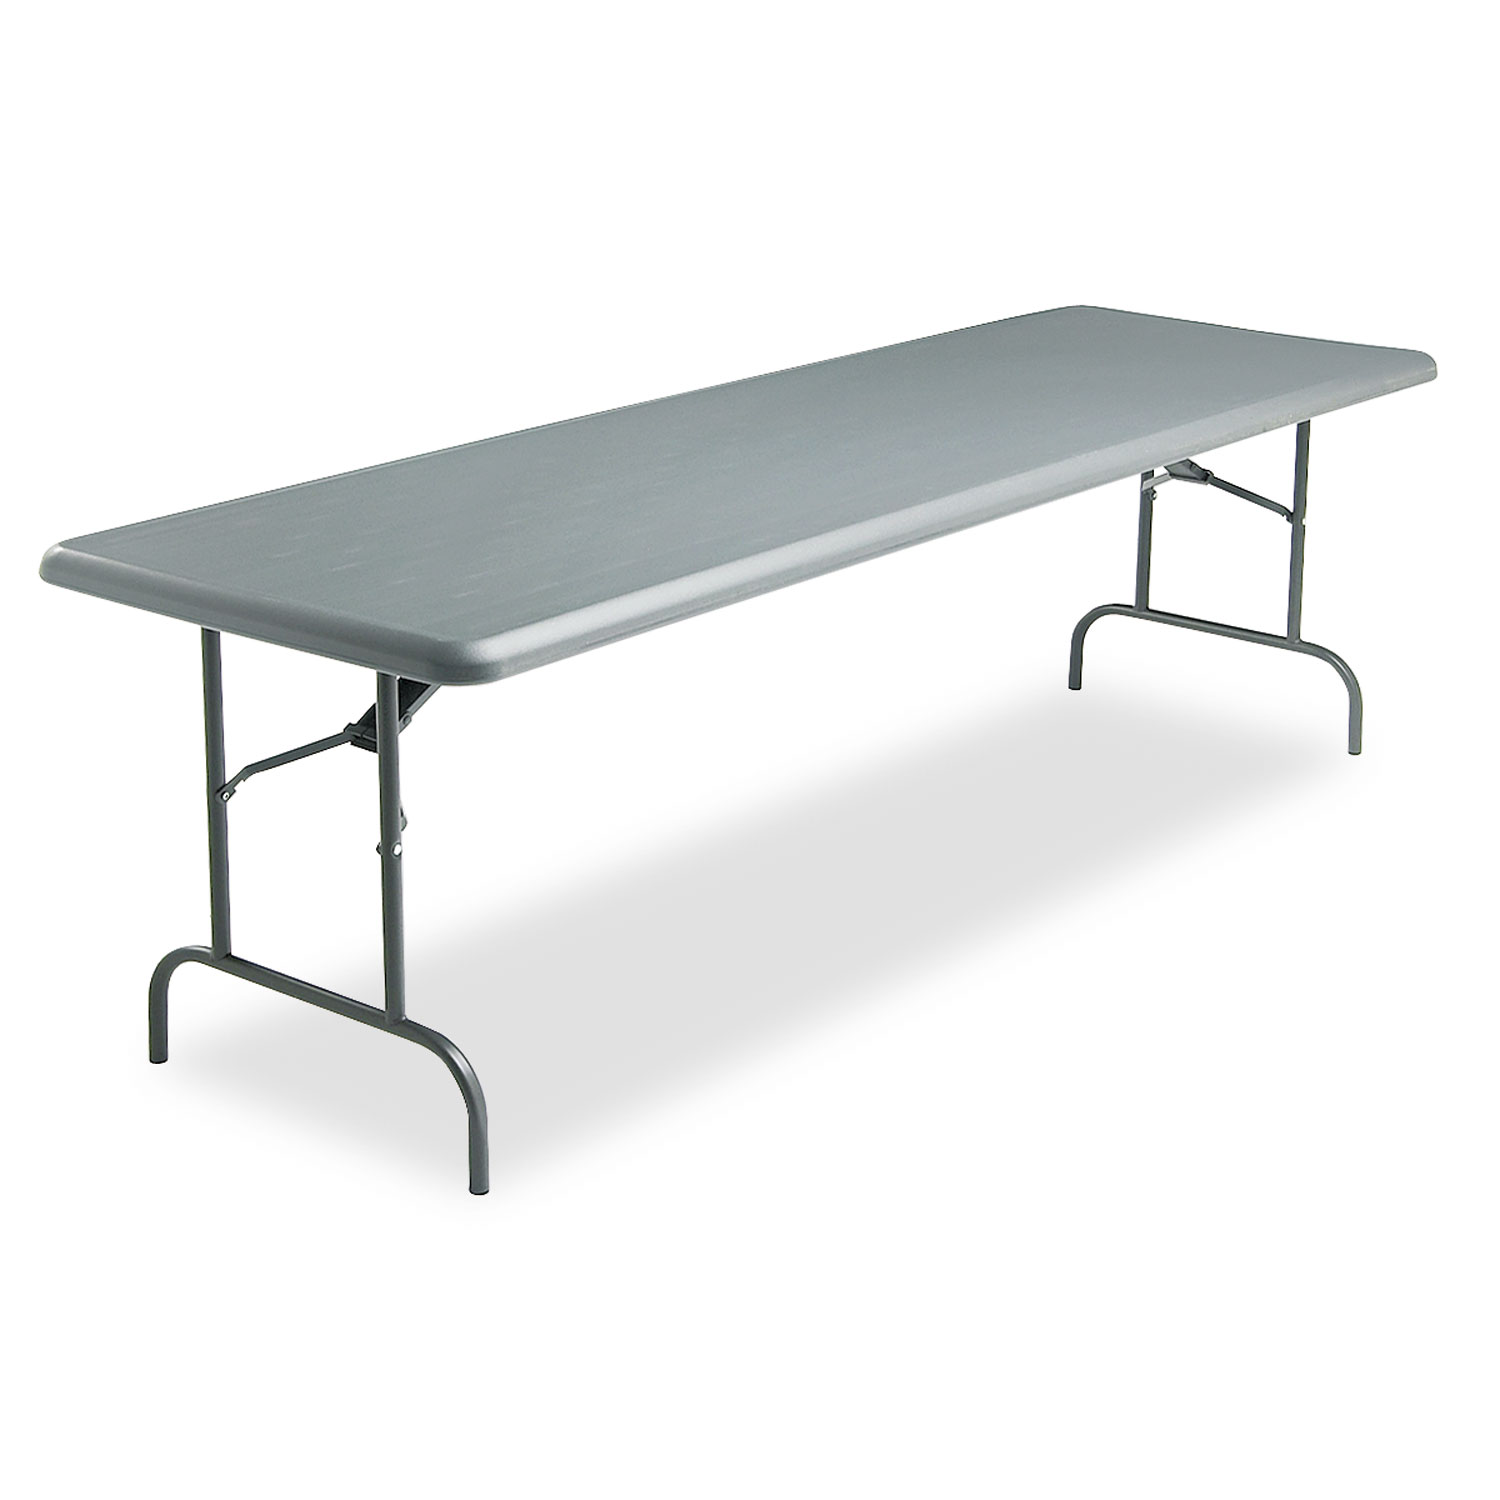 Iceberg ICE65237 IndestrucTables Too 1200 Series Resin Folding Table, 96w x 30d x 29h, Charcoal